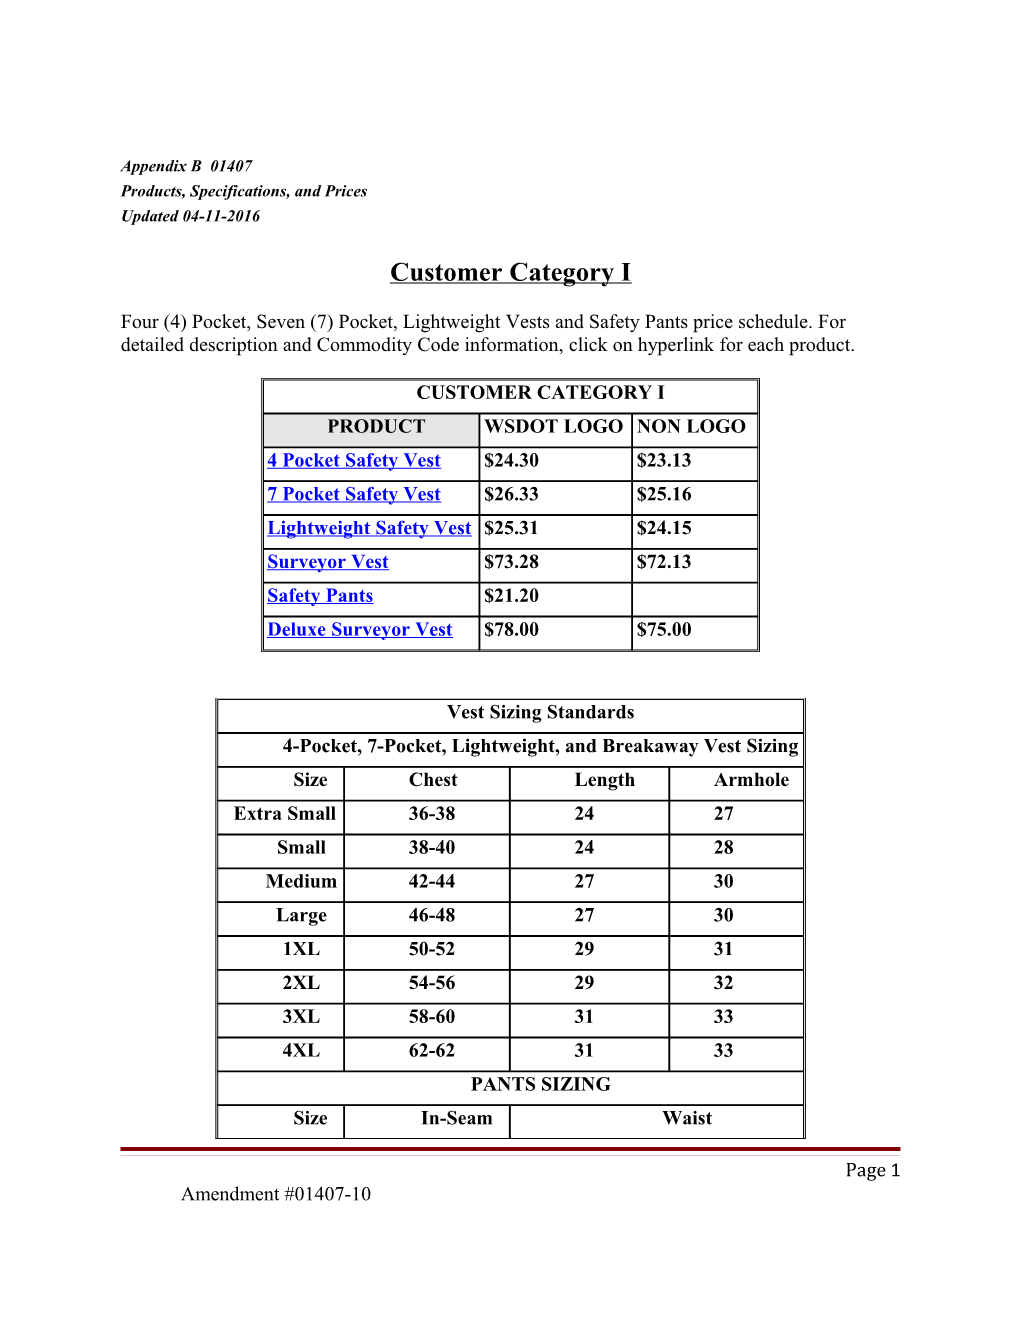 Products, Specifications, and Prices